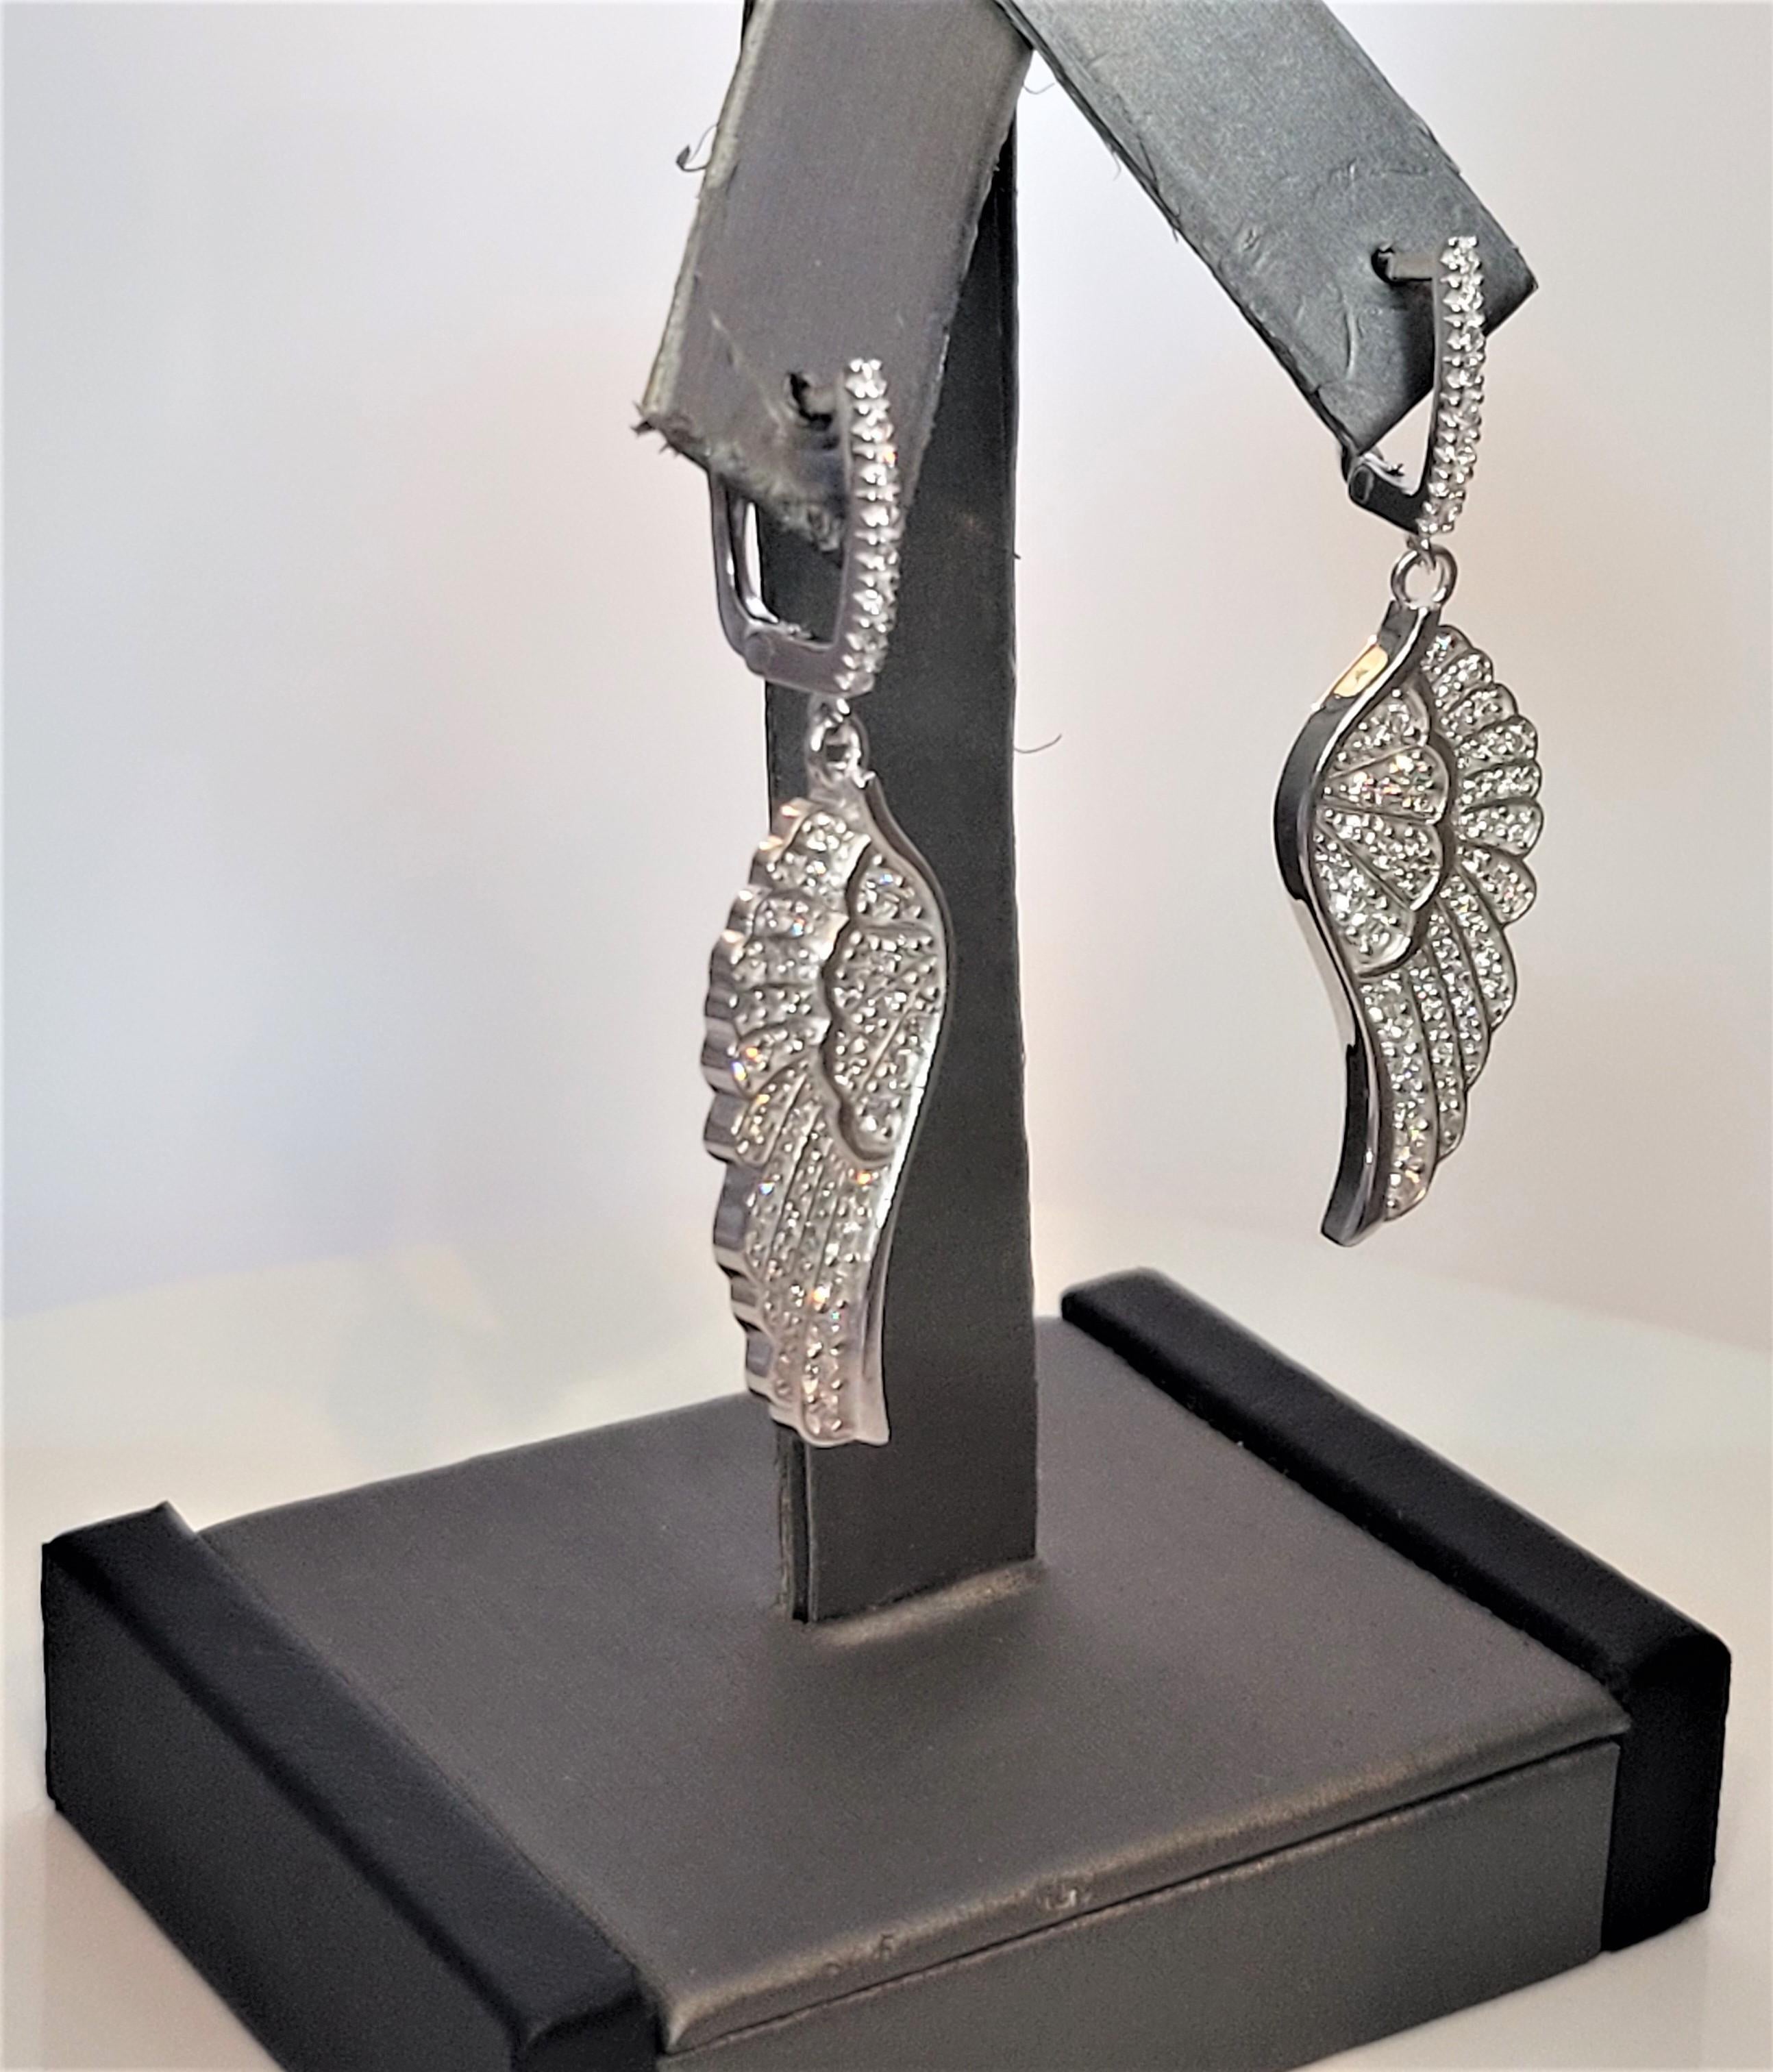 Hand Made Jeweler
Wings Earring
Diamonds 2.20ct
Diamond Clarity VS
Color Grade G
Weight 14gr total
Condition New, never worn
Retail Price $5900